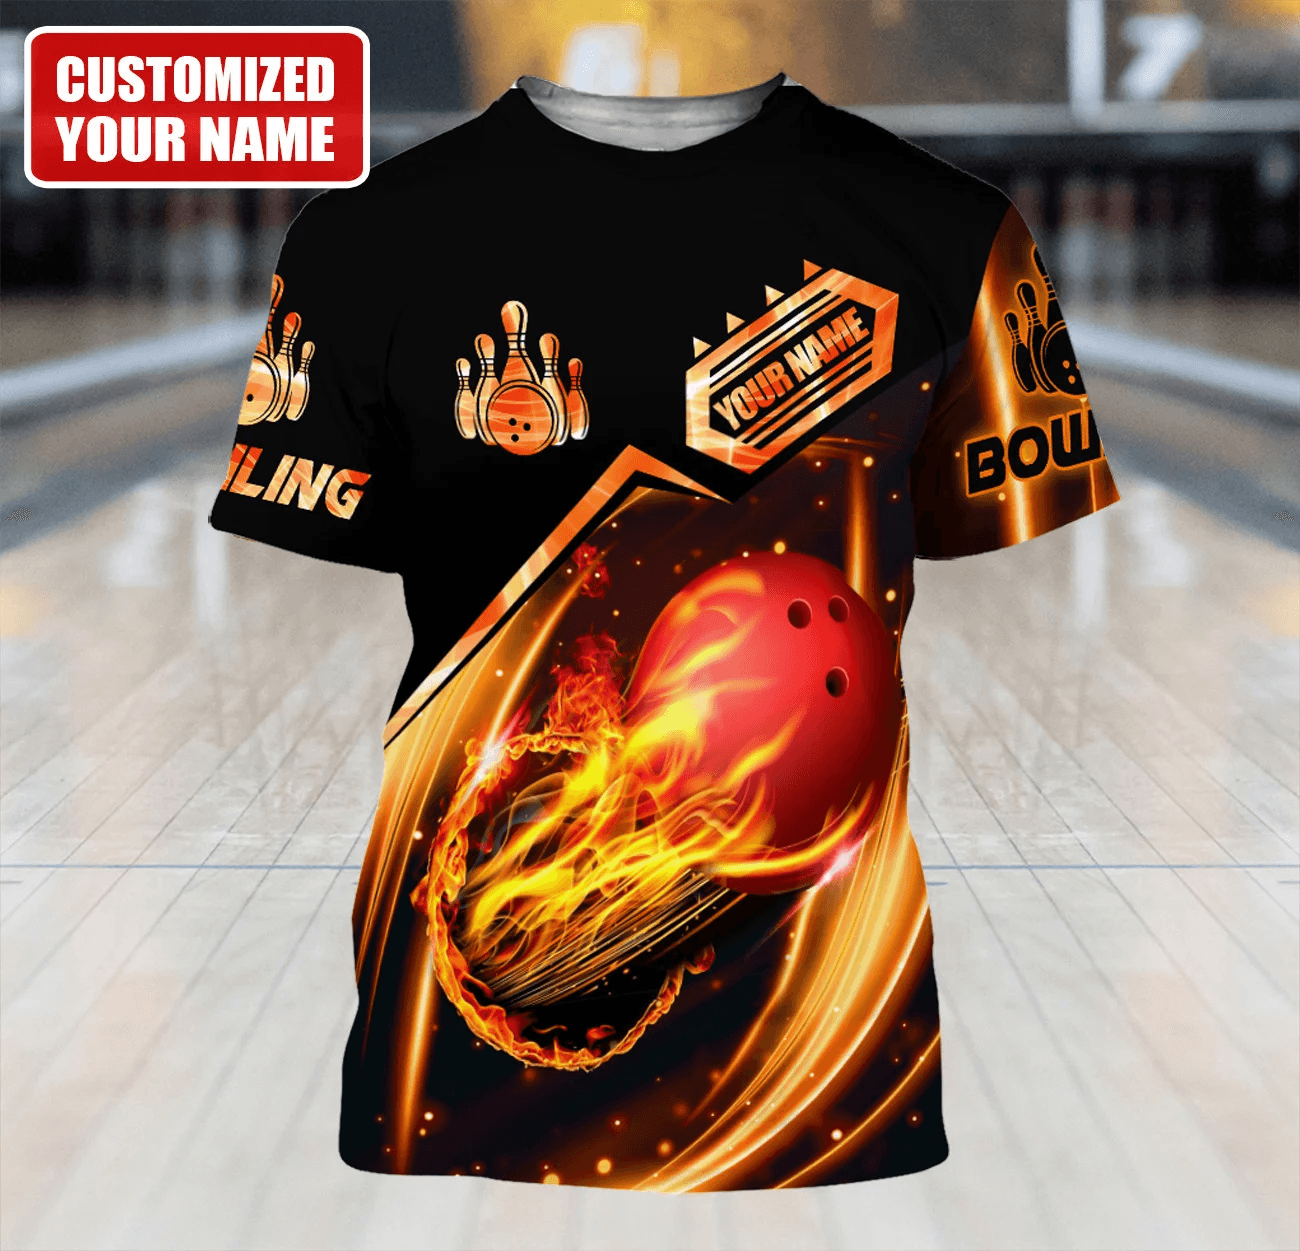 Customized Name Bowling Shirt, Personalized Name Fire Bowling T Shirt For Bowling Team Players - Perfect Gift For Bowling Lovers, Bowlers - Amzanimalsgift